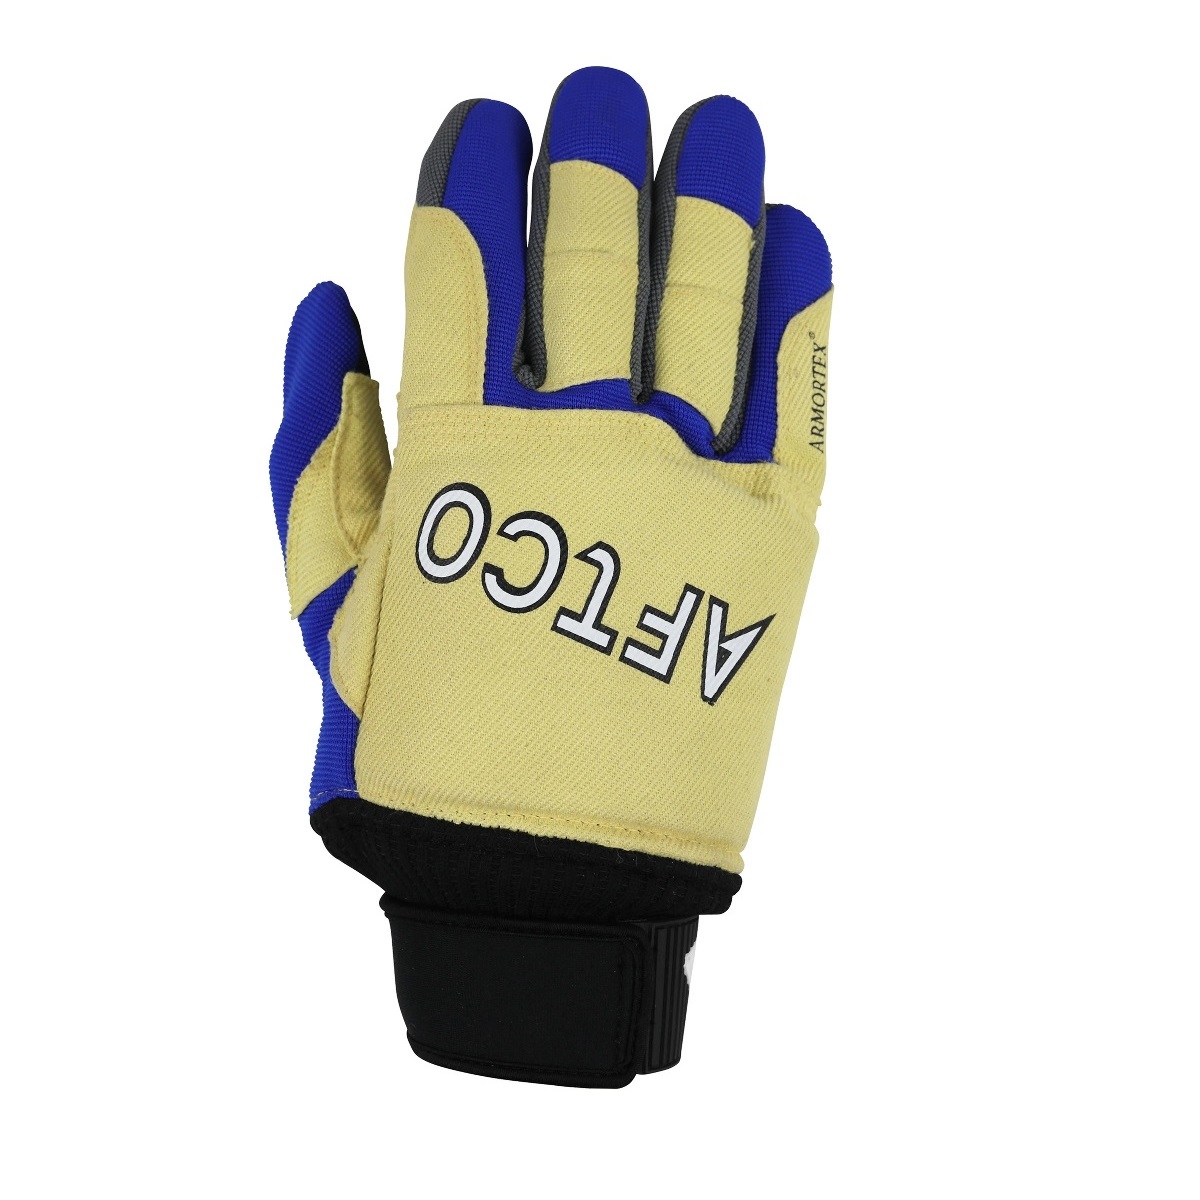 FLEECE LINED RUBBER GLOVES - Fisherman's Outfitter